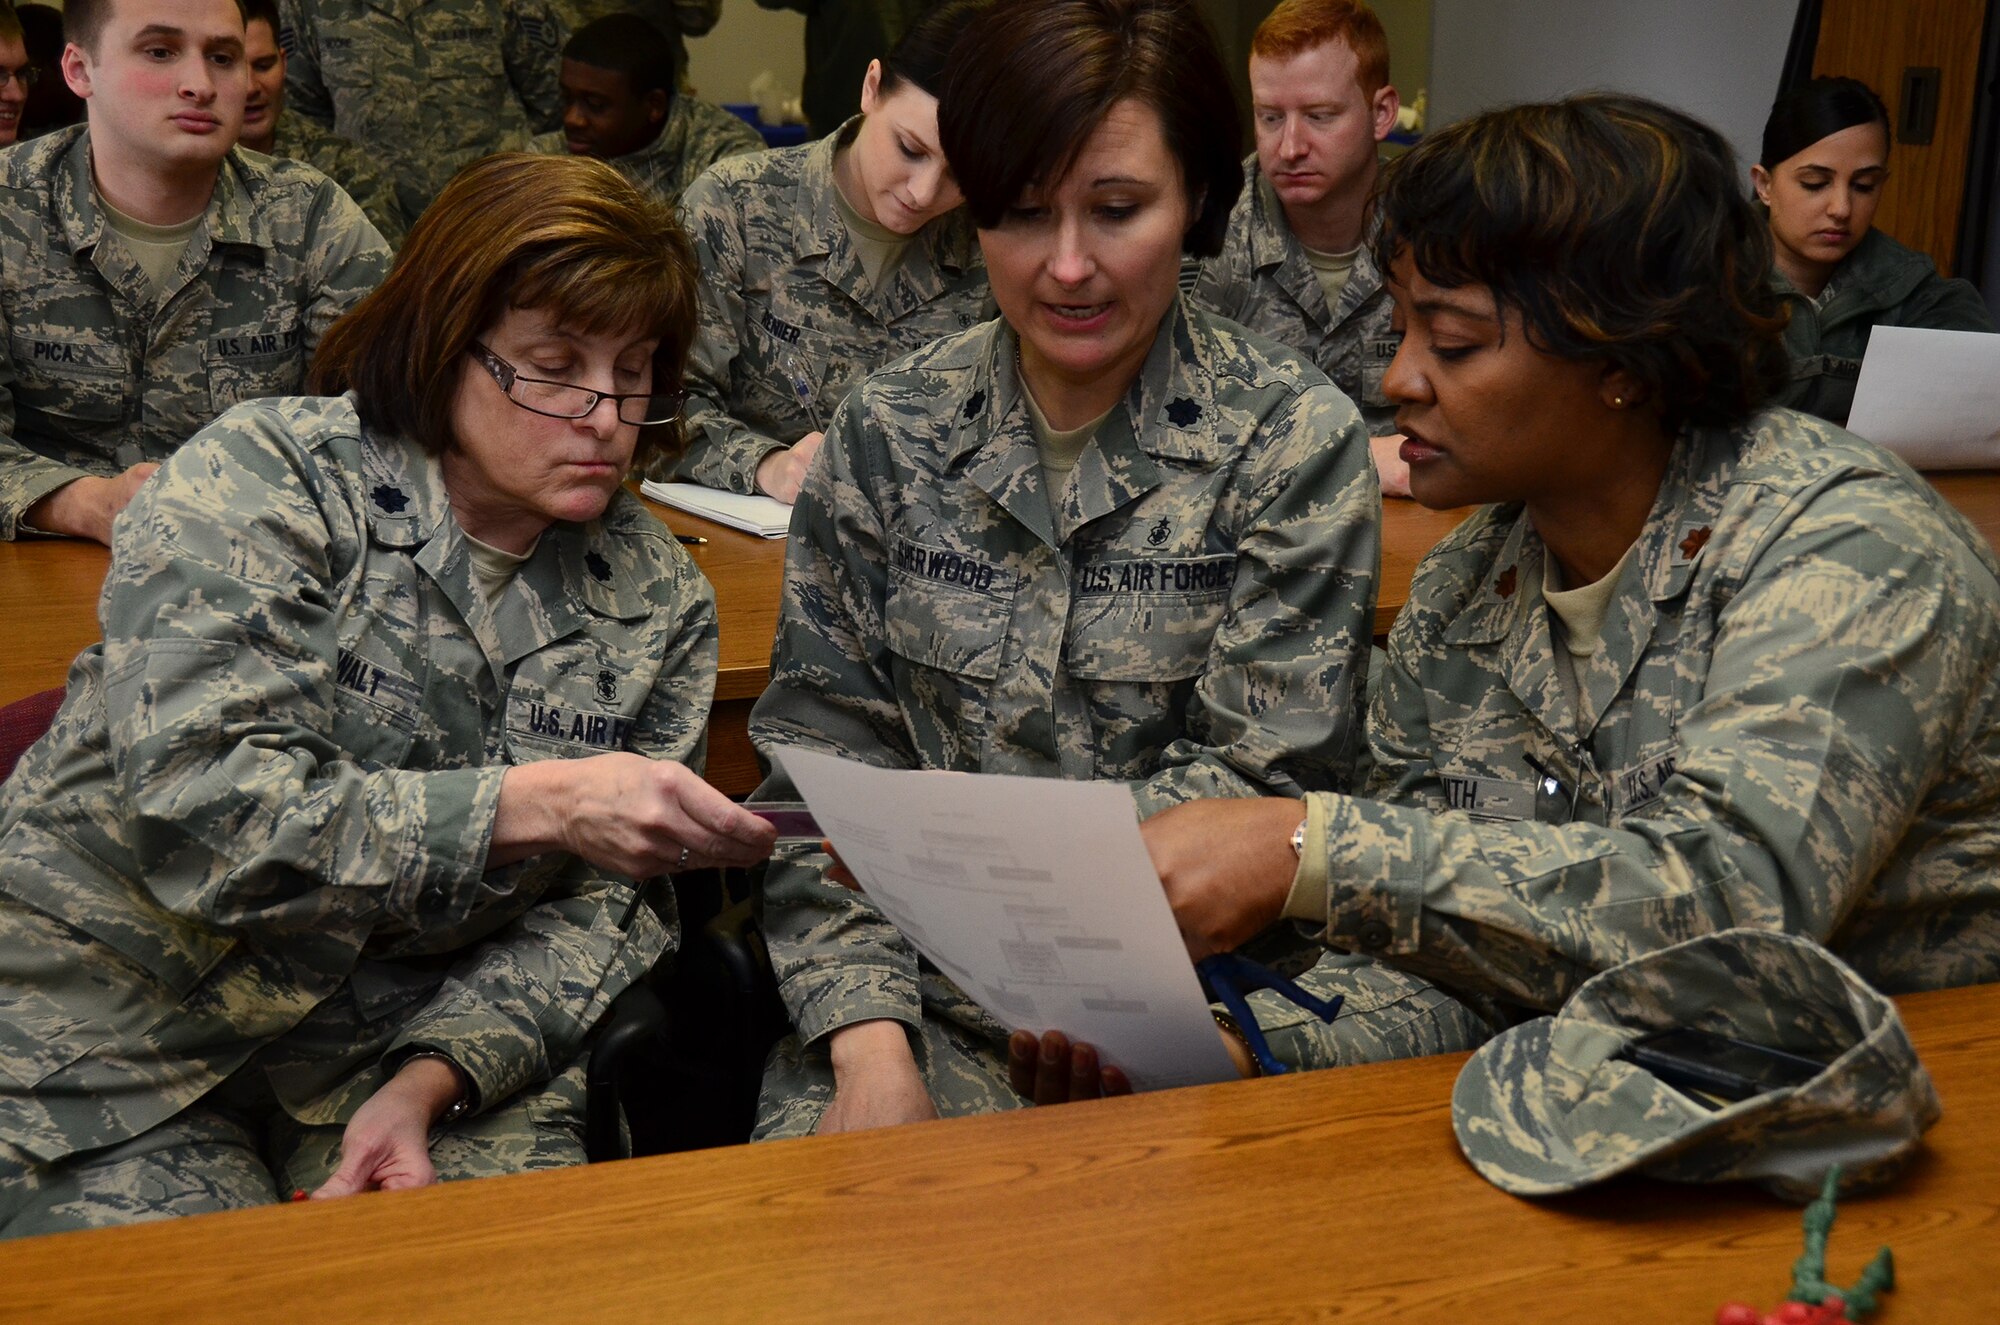 WRIGHT-PATTERSON AIR FORCE BASE, Ohio – From left to right; 445th Aeromedical Staging Squadron reservists Lt. Cols. Kathleen Stierwalt and Rachel Sherwood, both clinical nurses, and Maj. Marie Smith, health services officer, discuss an exercise scenario as part of their simple triage and rapid treatment method, or START, training conducted during the Feb. 24 unit training assembly. (U.S. Air Force photo/Staff Sgt. Amanda Duncan)